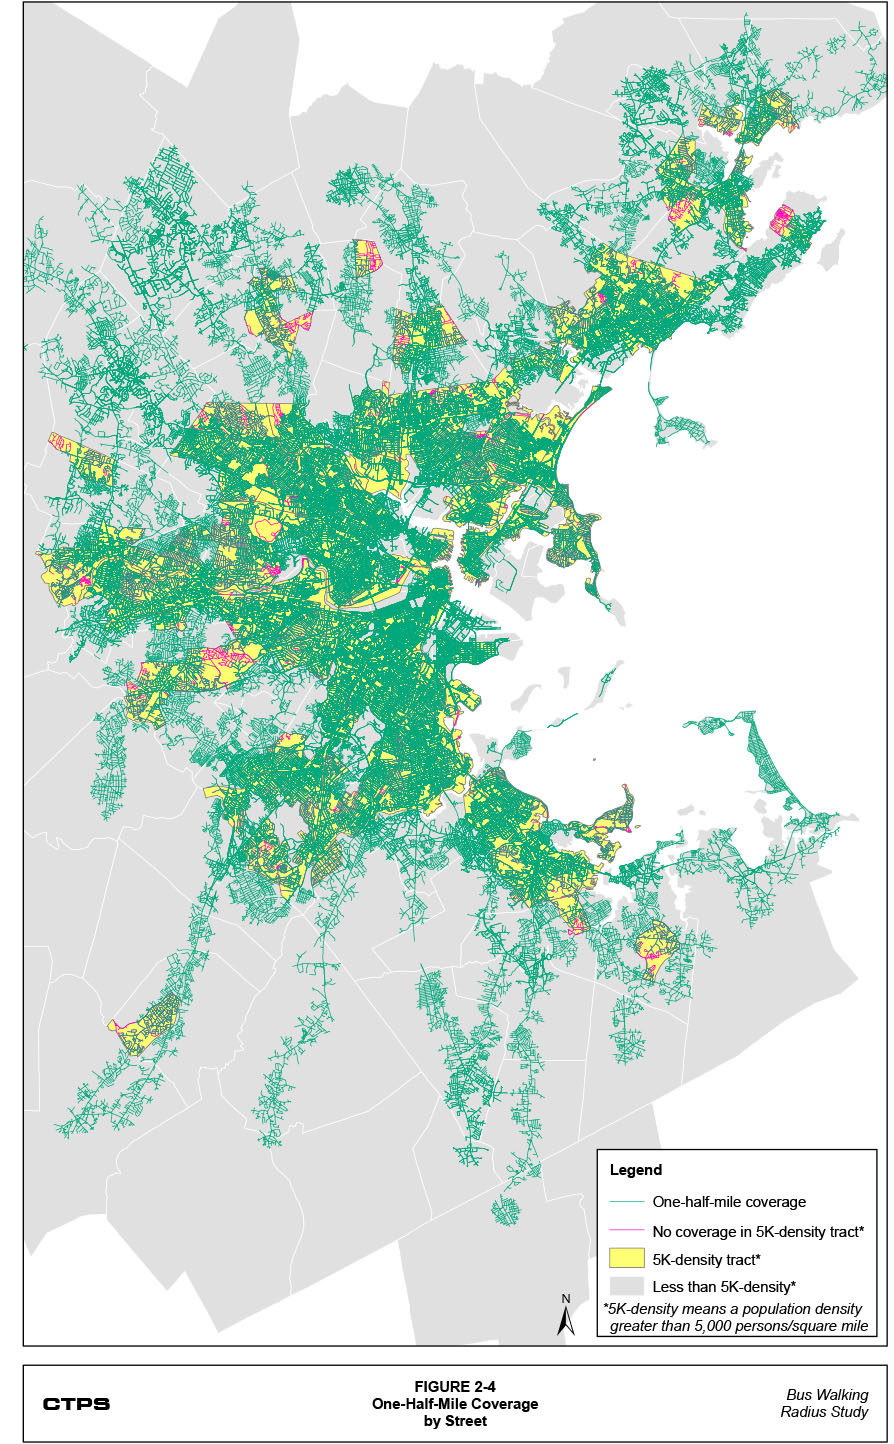 Figure 2-4: One-Half-Mile Coverage by Street. This is a map that shows two categories of street miles: 1) the street miles in the one-half-mile coverage for the entire MBTA bus and rapid transit systems; and 2) the street miles within census tracts with a population density greater than 5,000 persons per square mile. The map also shows where these two categories of street miles do and do not overlap.